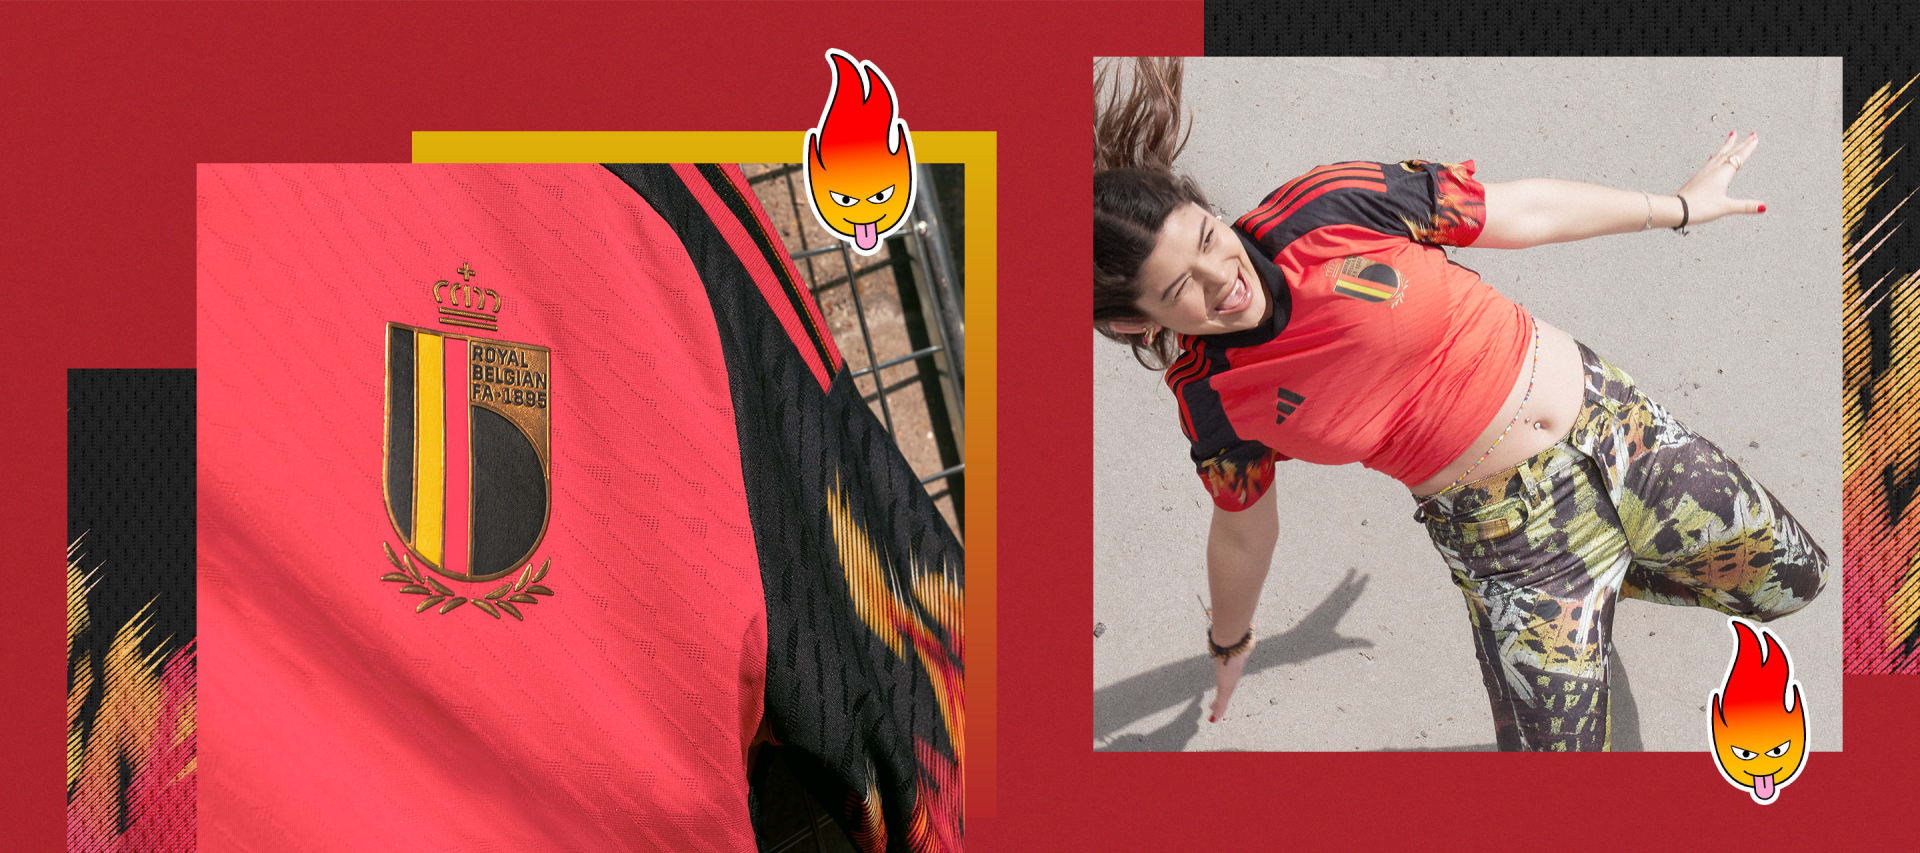 adidas 2022-23 Belgium Authentic Home Jersey - Red-Black - XL in 2023